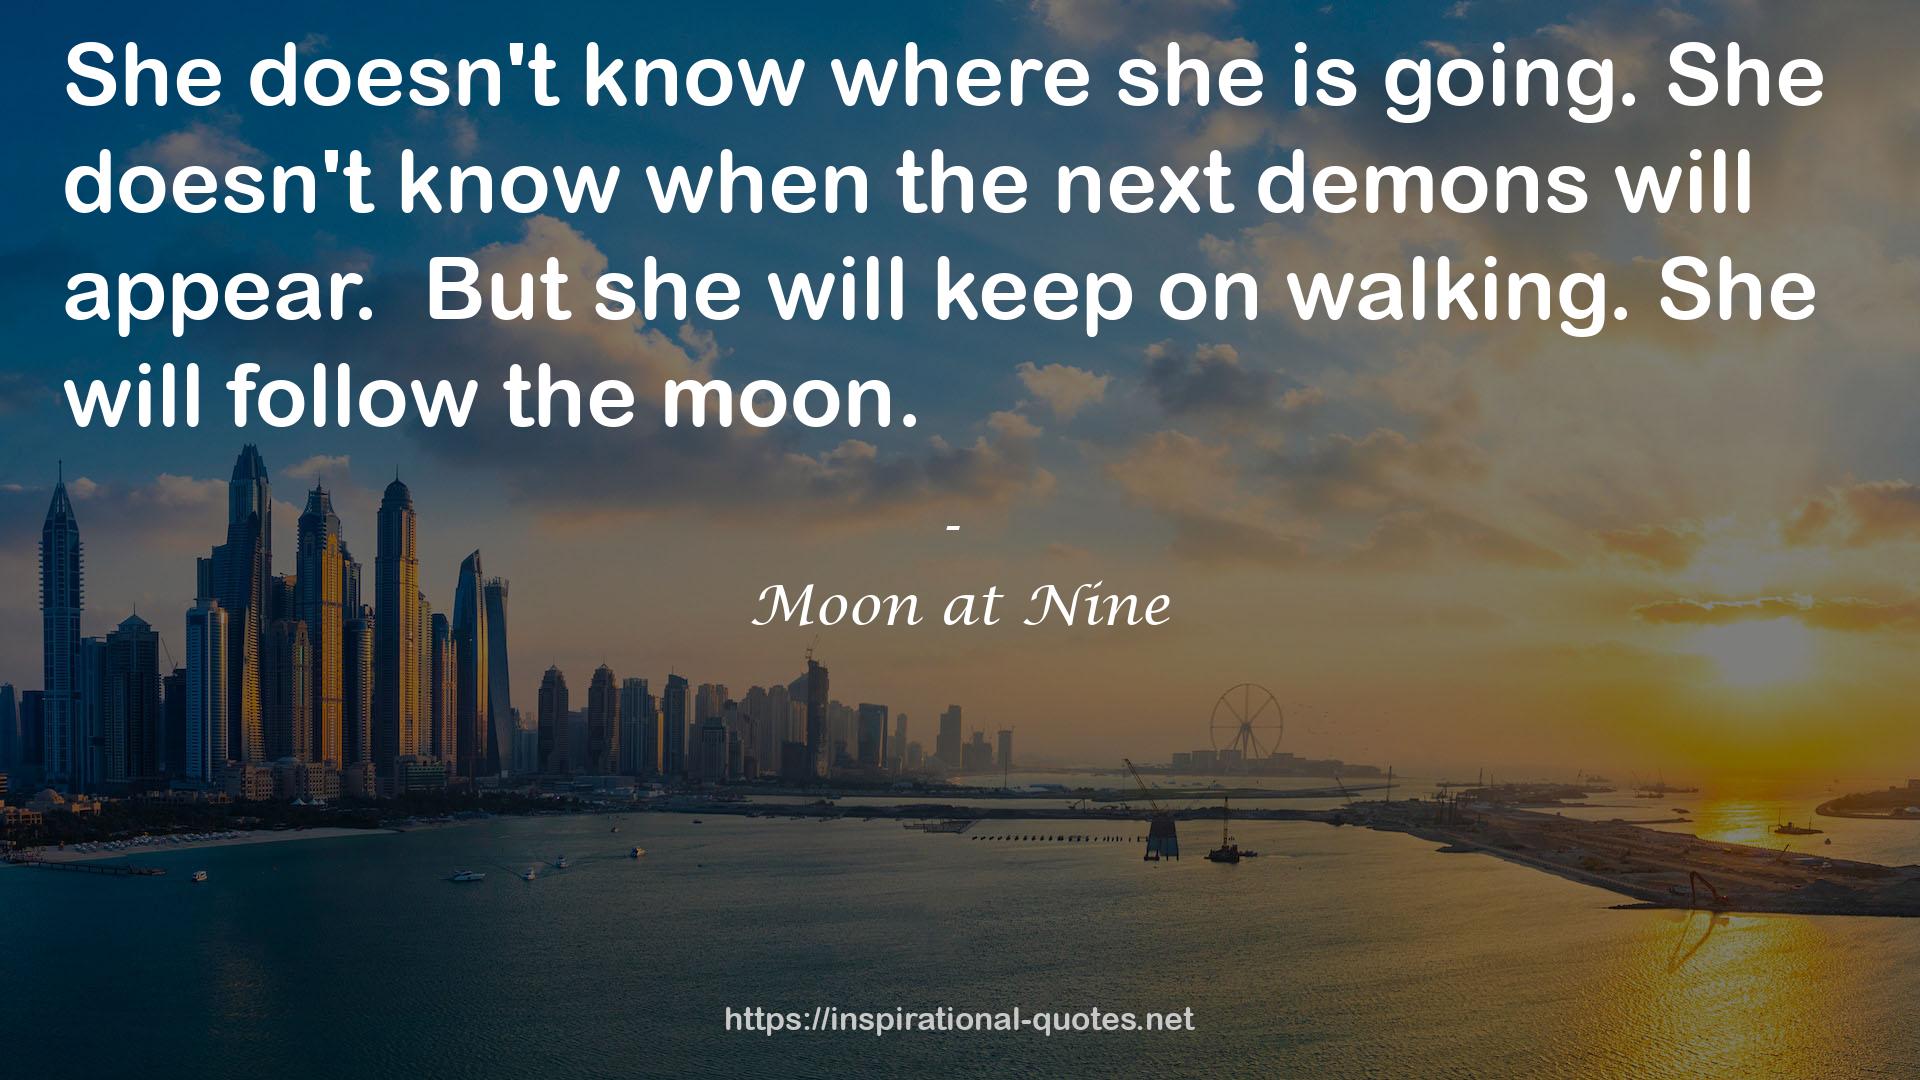 Moon at Nine QUOTES